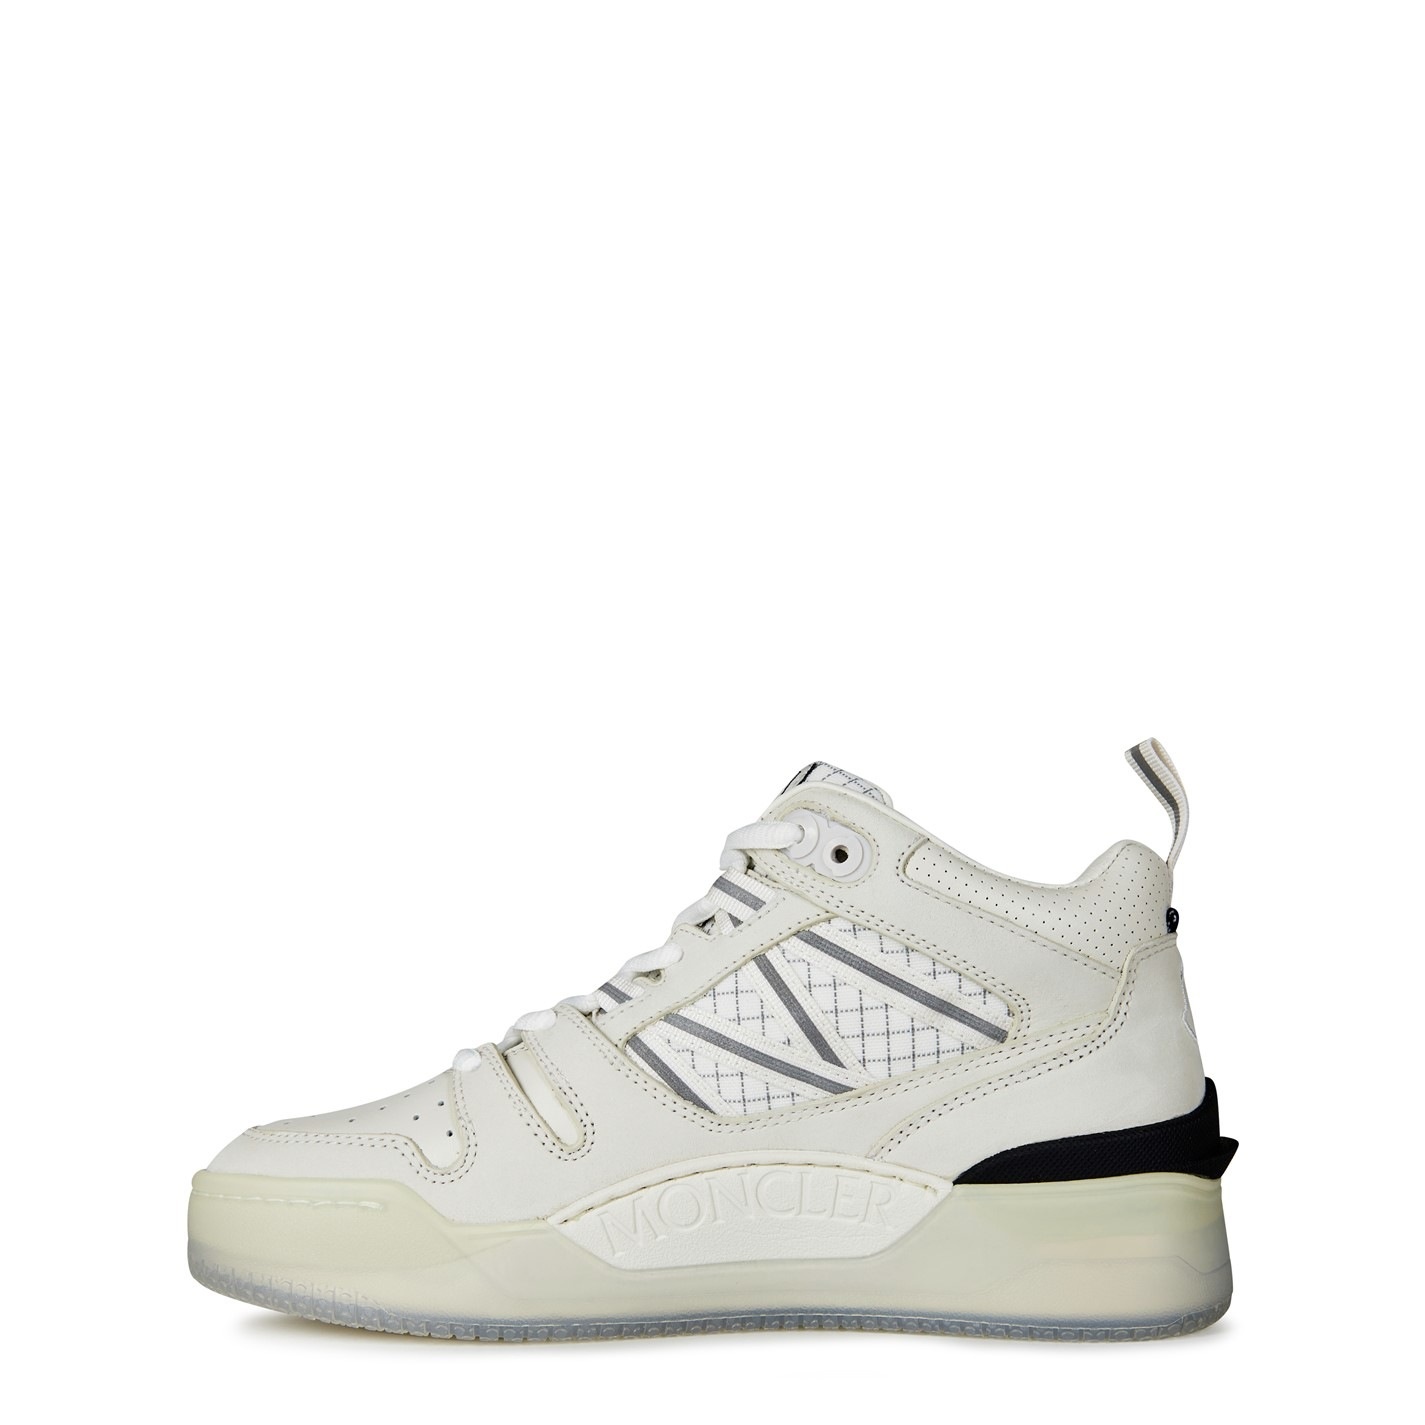 PIVOT LEATHER HIGH TOP SNEAKERS - 3